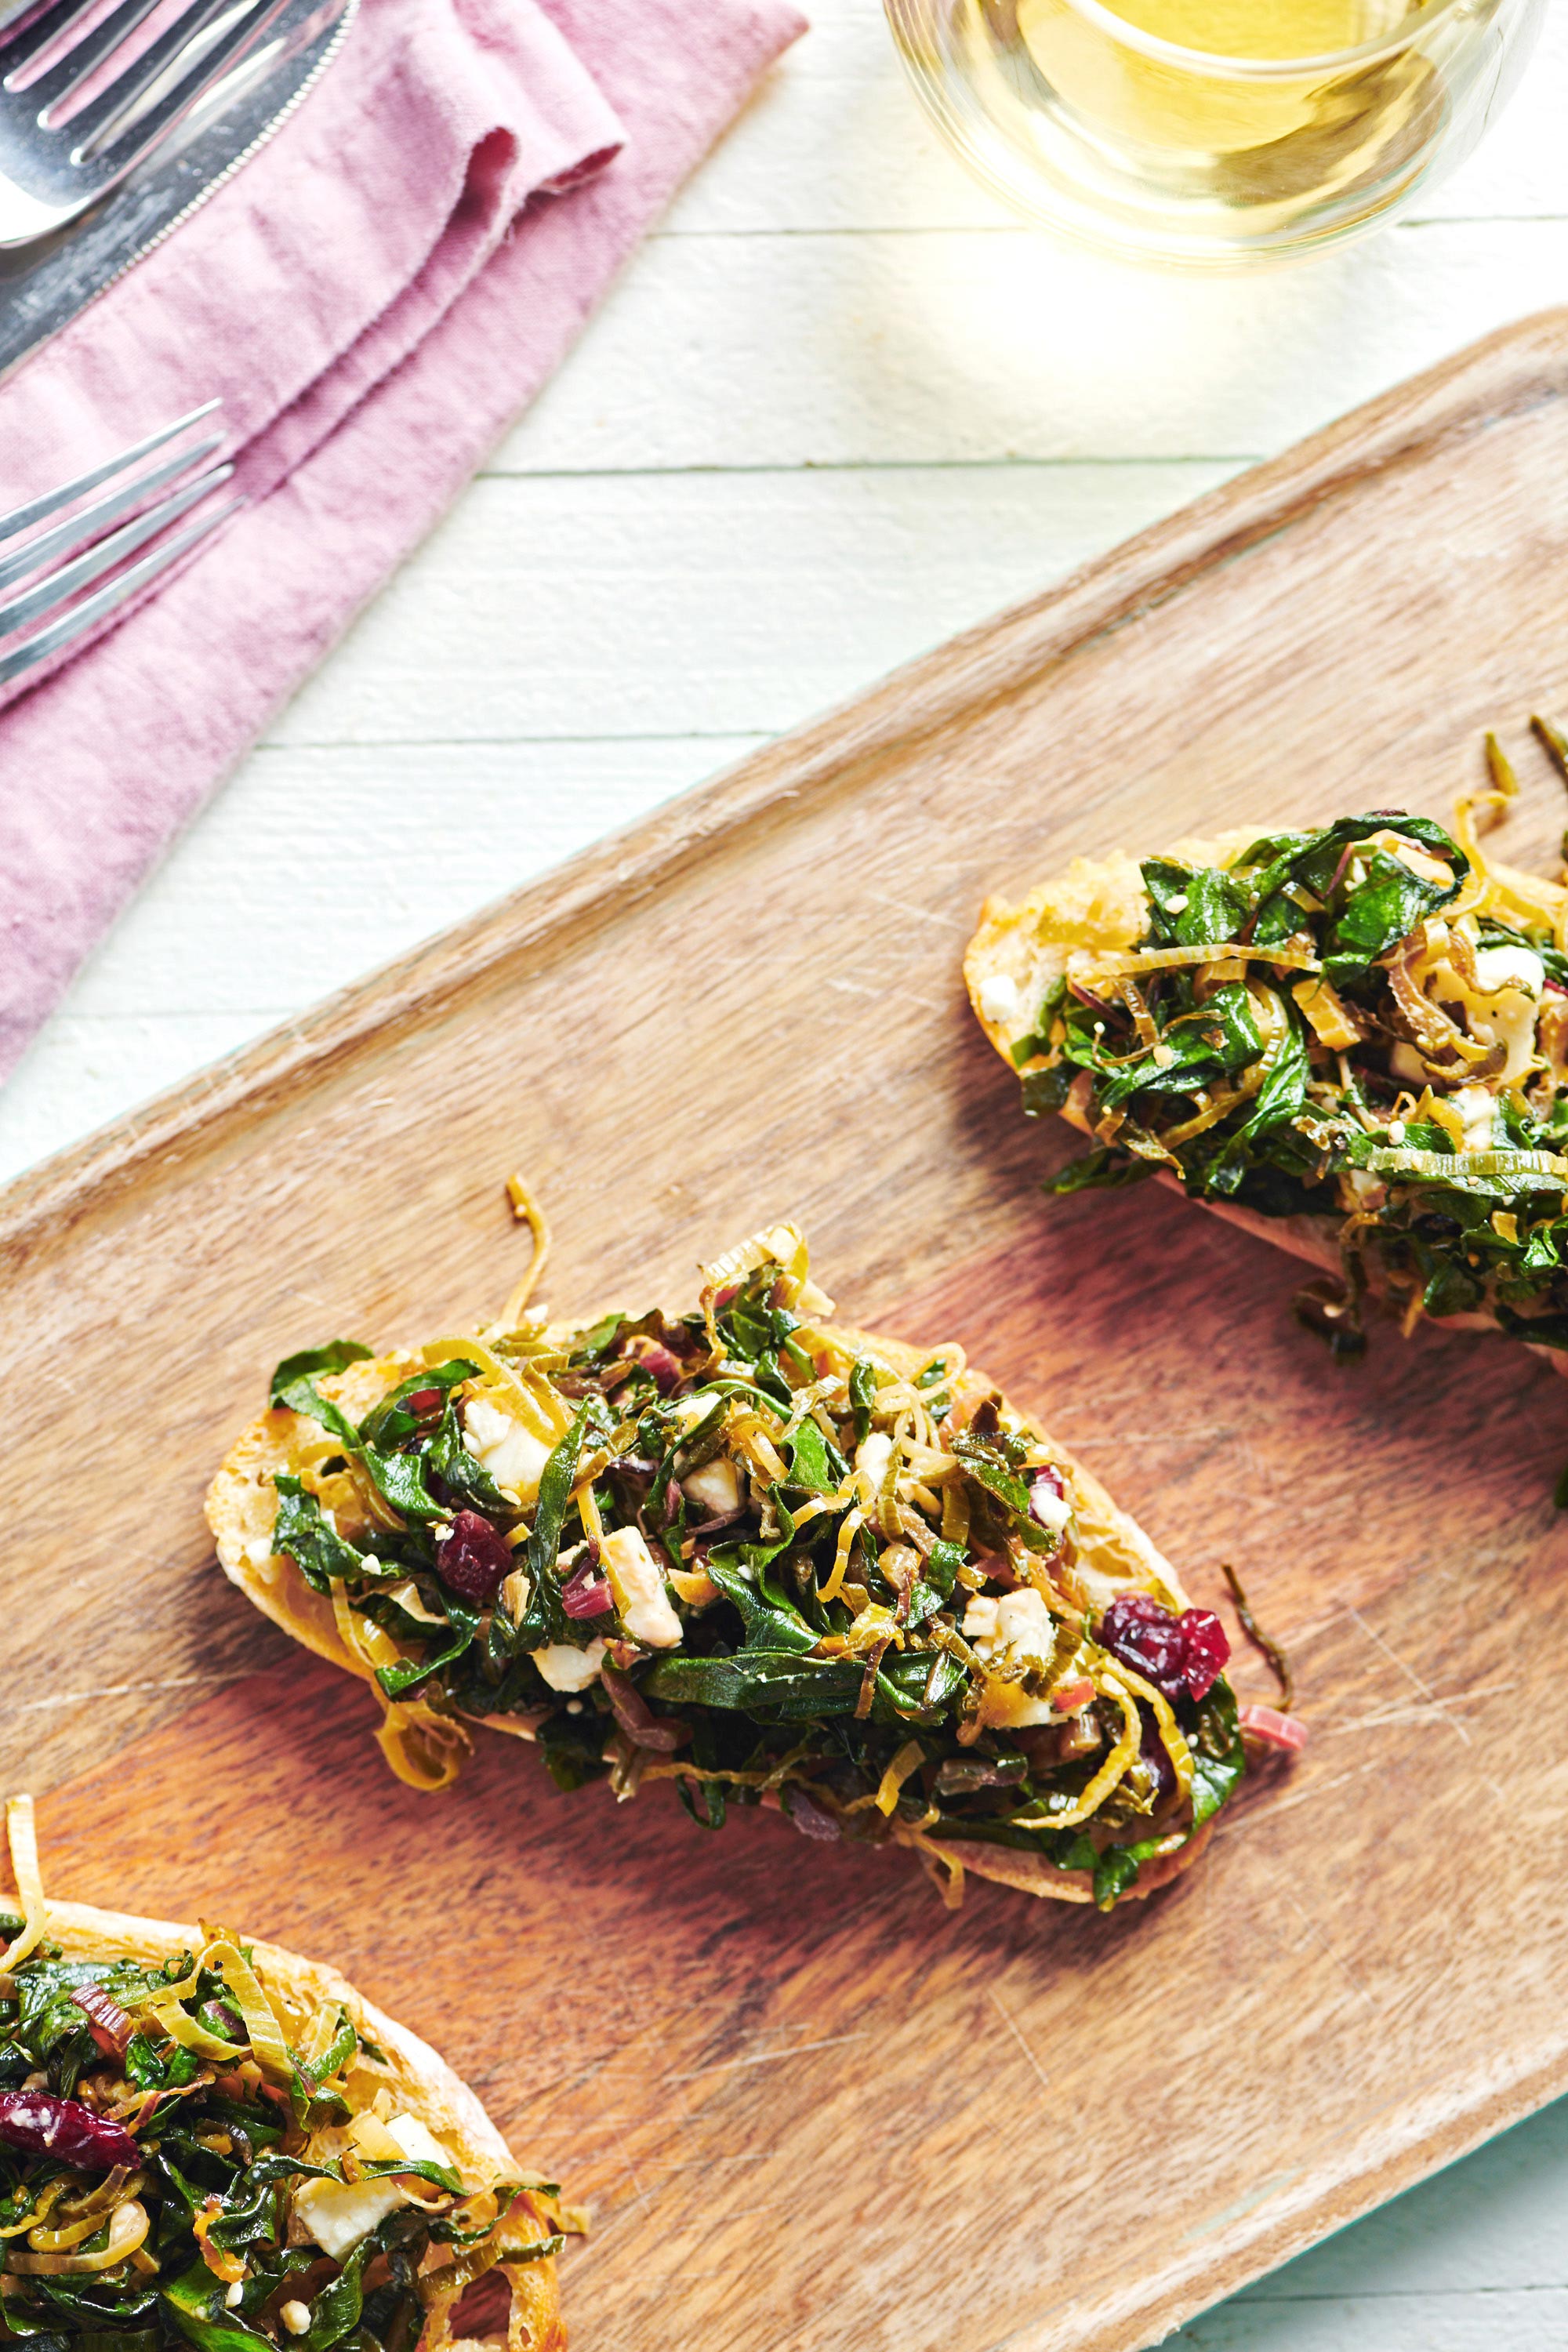 Three pieces of bruschetta topped with Swiss chard, leeks, and feta.